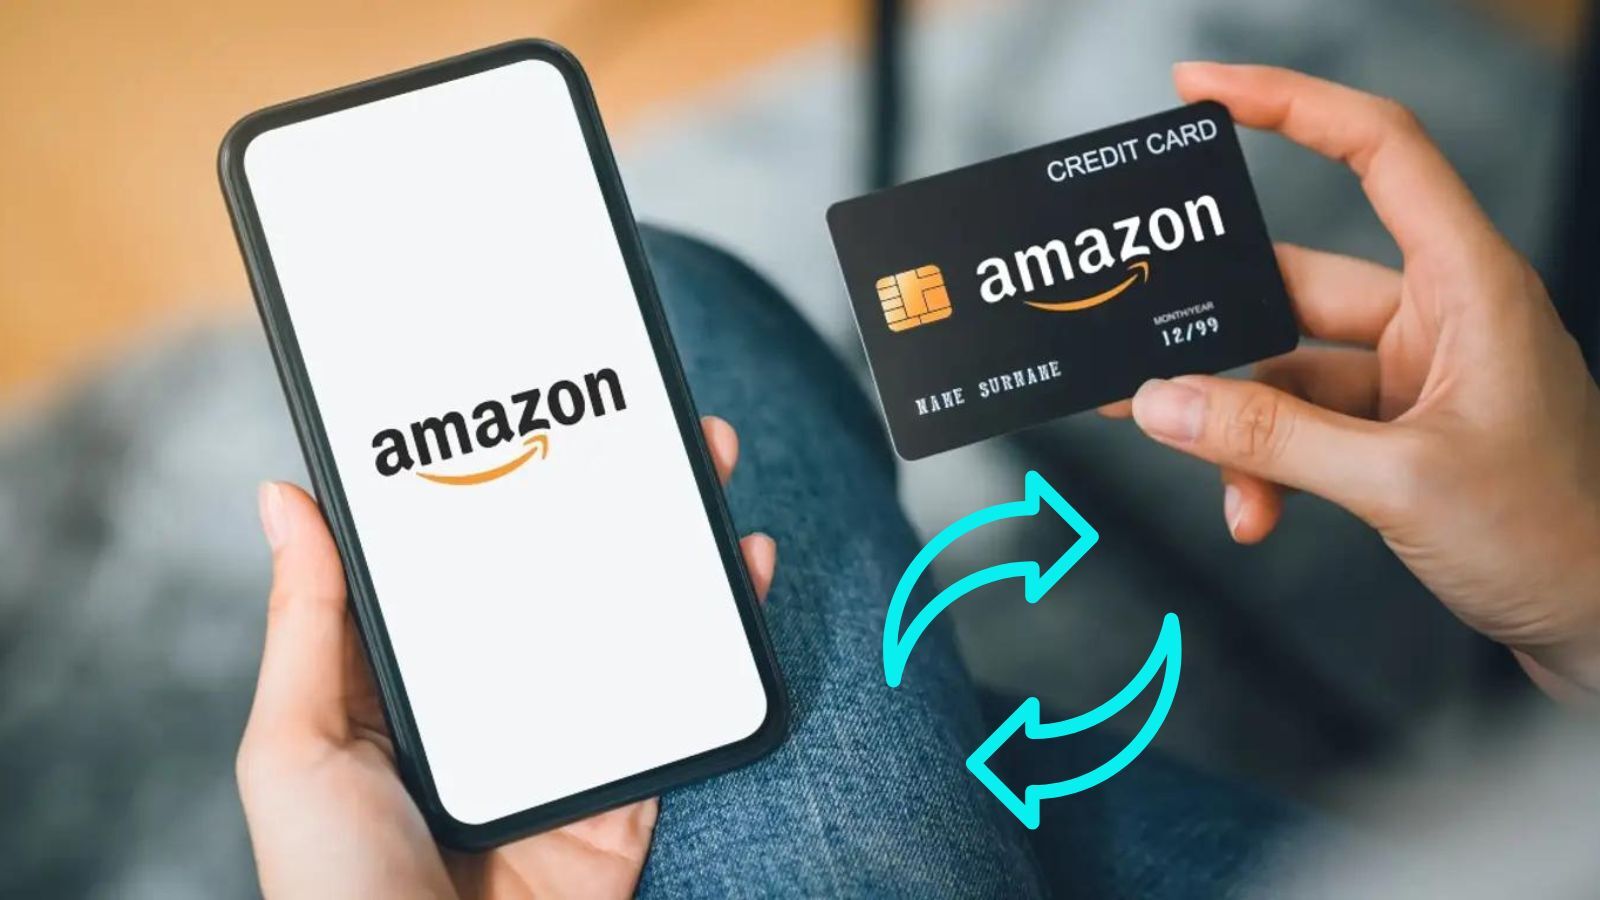 How Do You Replace A Lost Amazon Credit Card in 2022? 